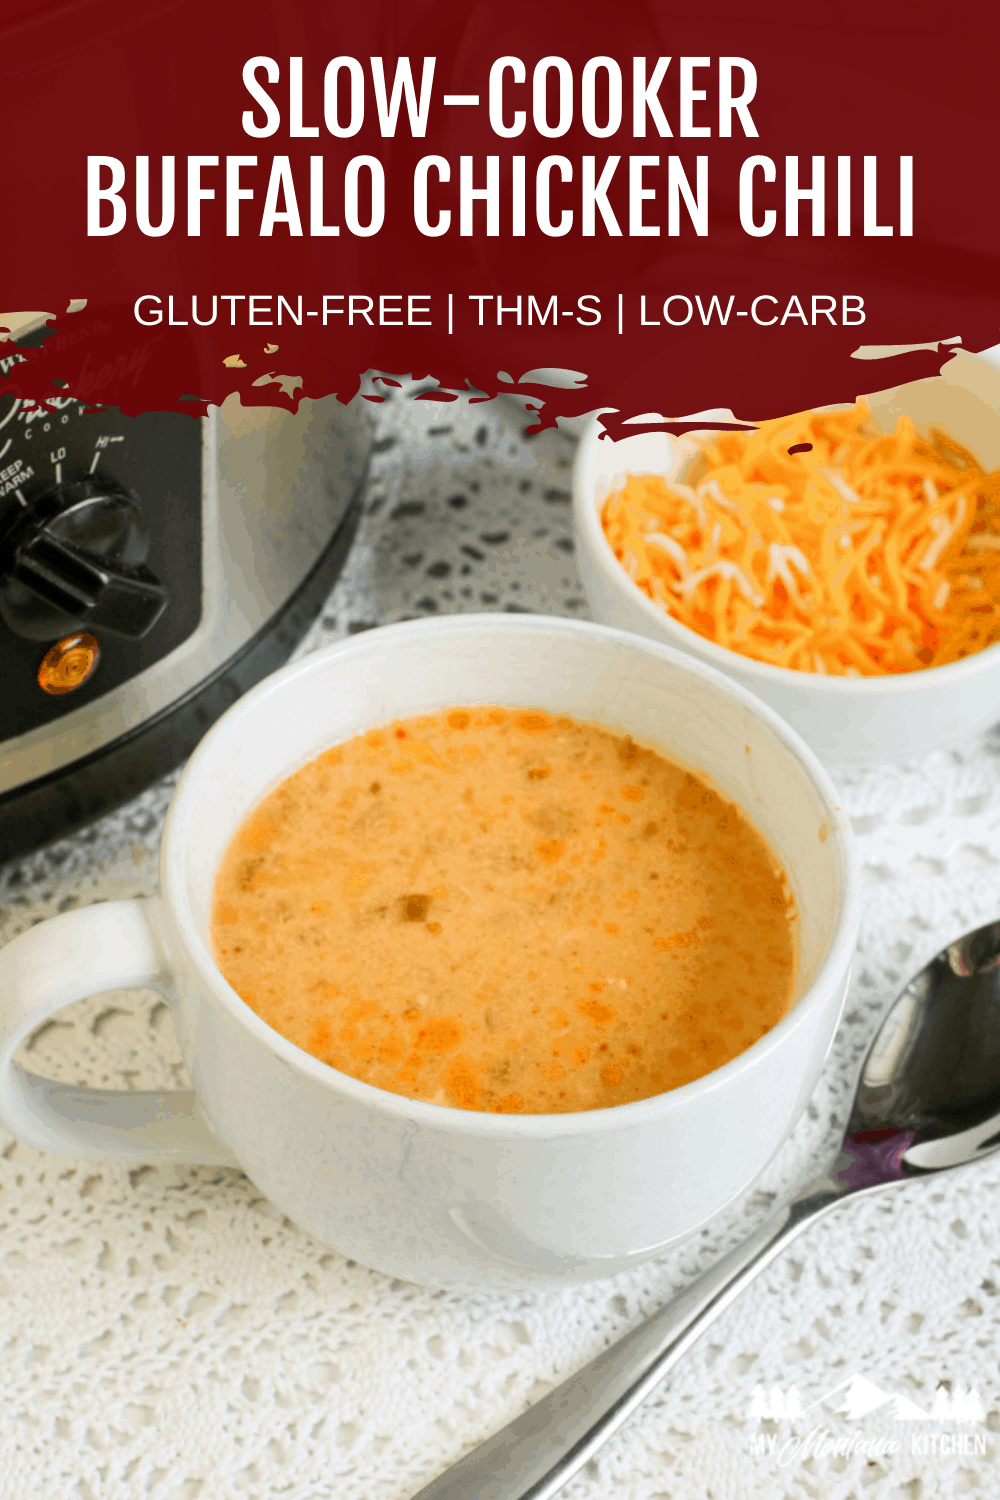 Whip up a batch of this popular slow cooker low carb buffalo chicken soup. This buffalo soup uses pantry essentials to whip up a comforting buffalo chicken soup that carries a little kick of flavor.